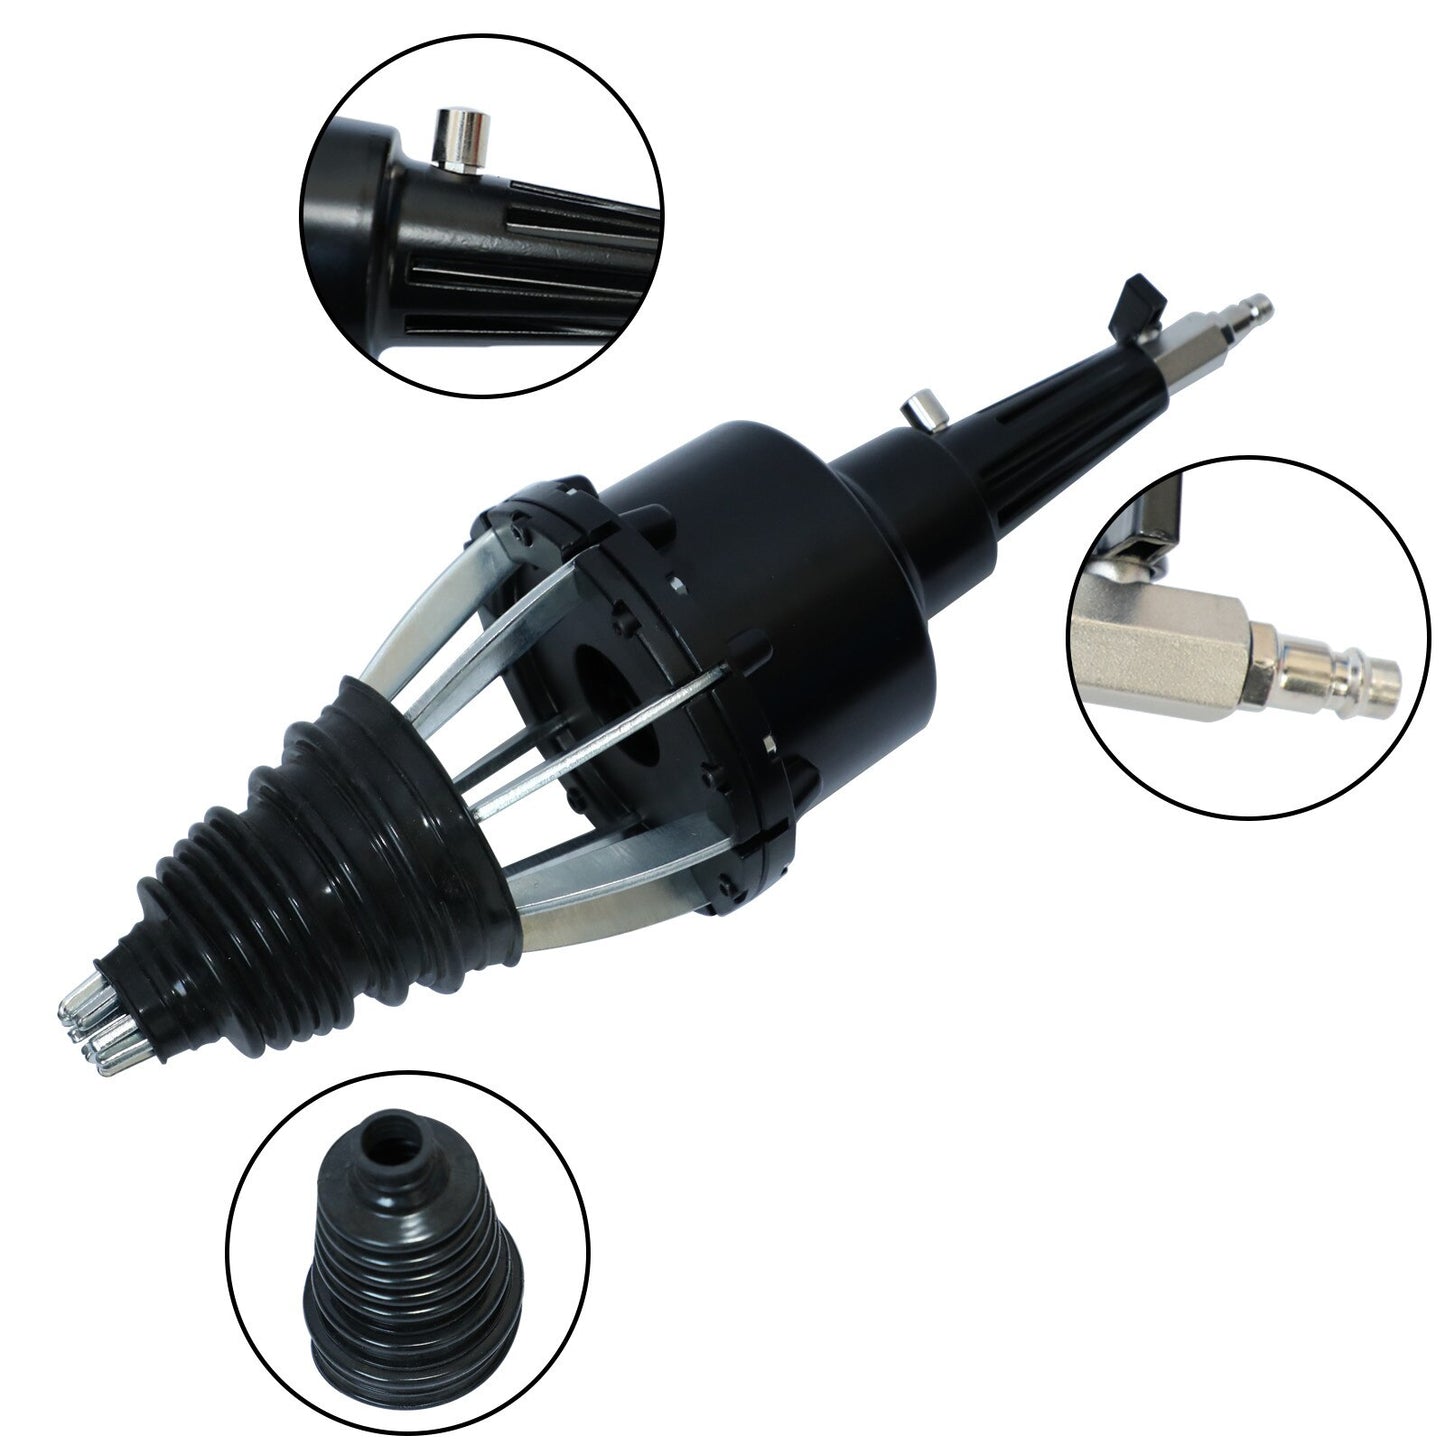 CV Joint Boot Install Installation Tool Removal AIR TOOL Without Removing Driveshaft